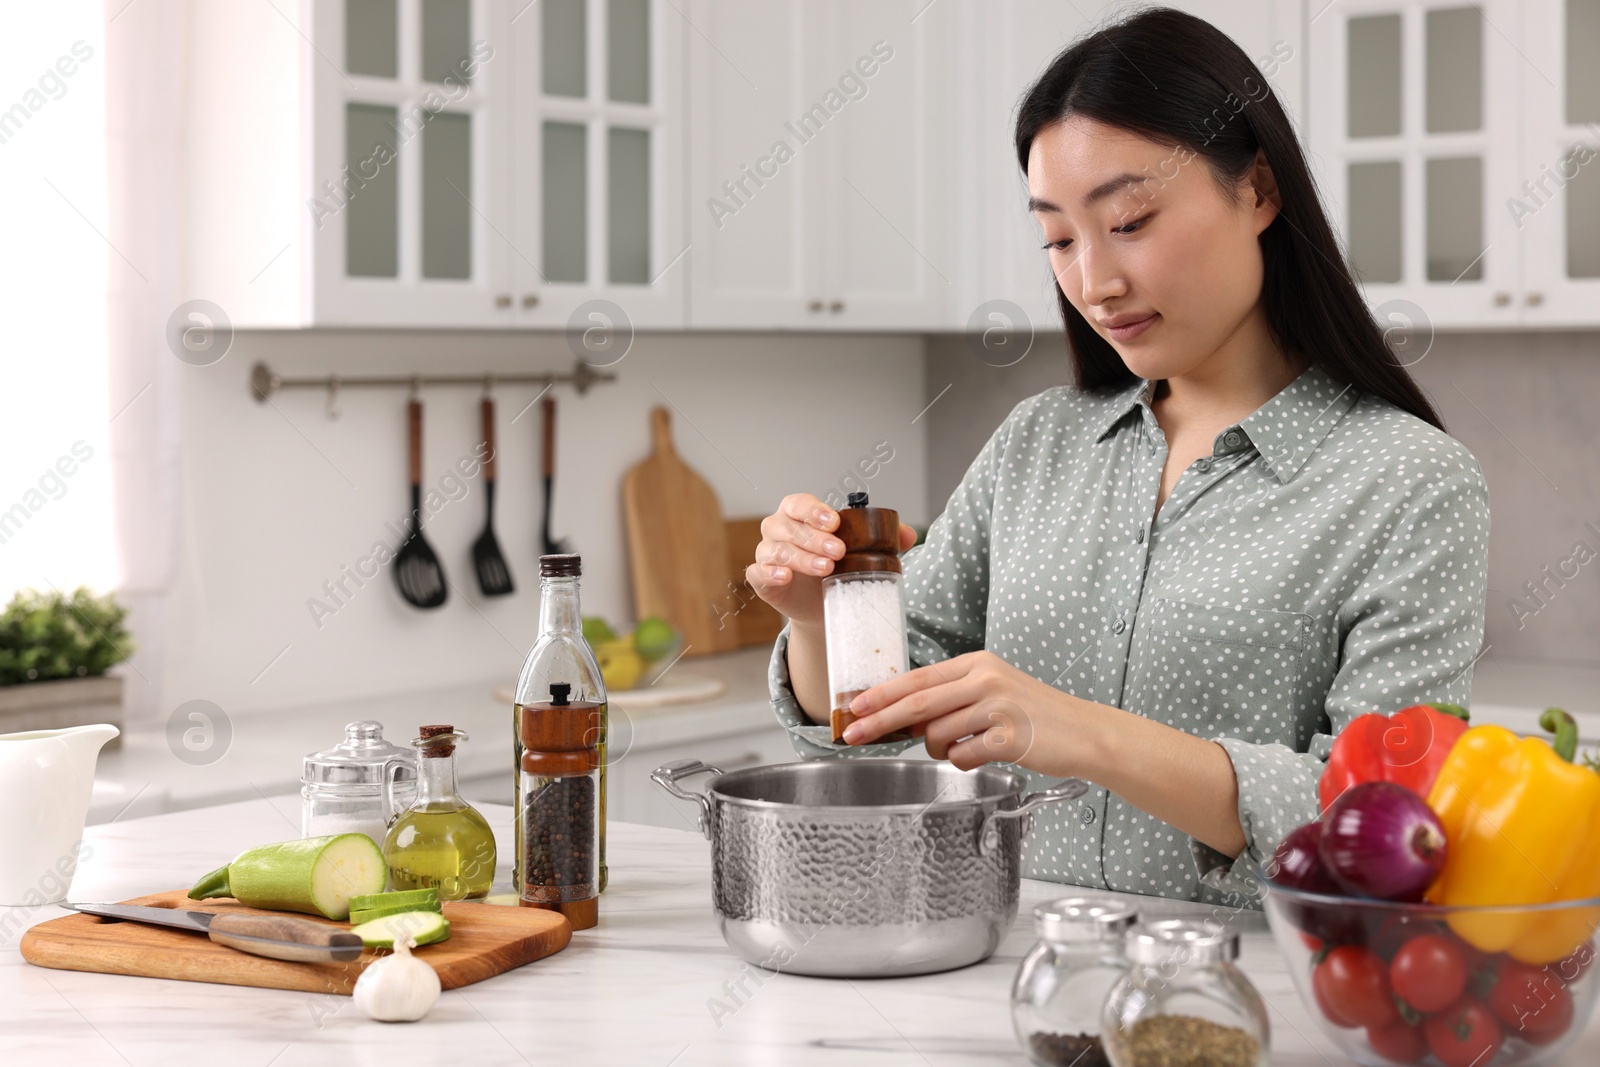 Photo of Beautiful woman cooking at countertop in kitchen